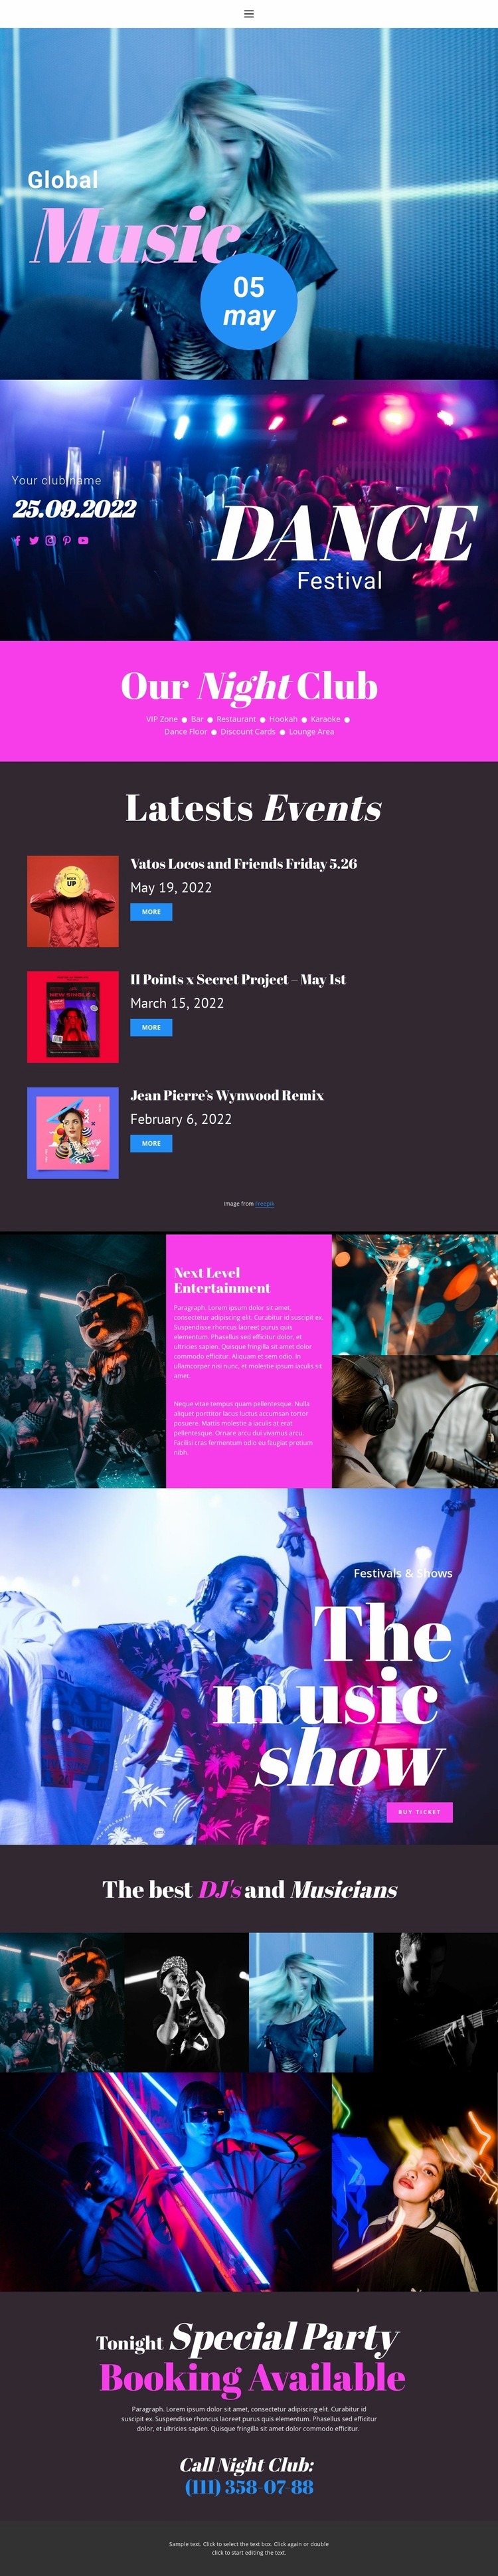 Musical explosion Homepage Design